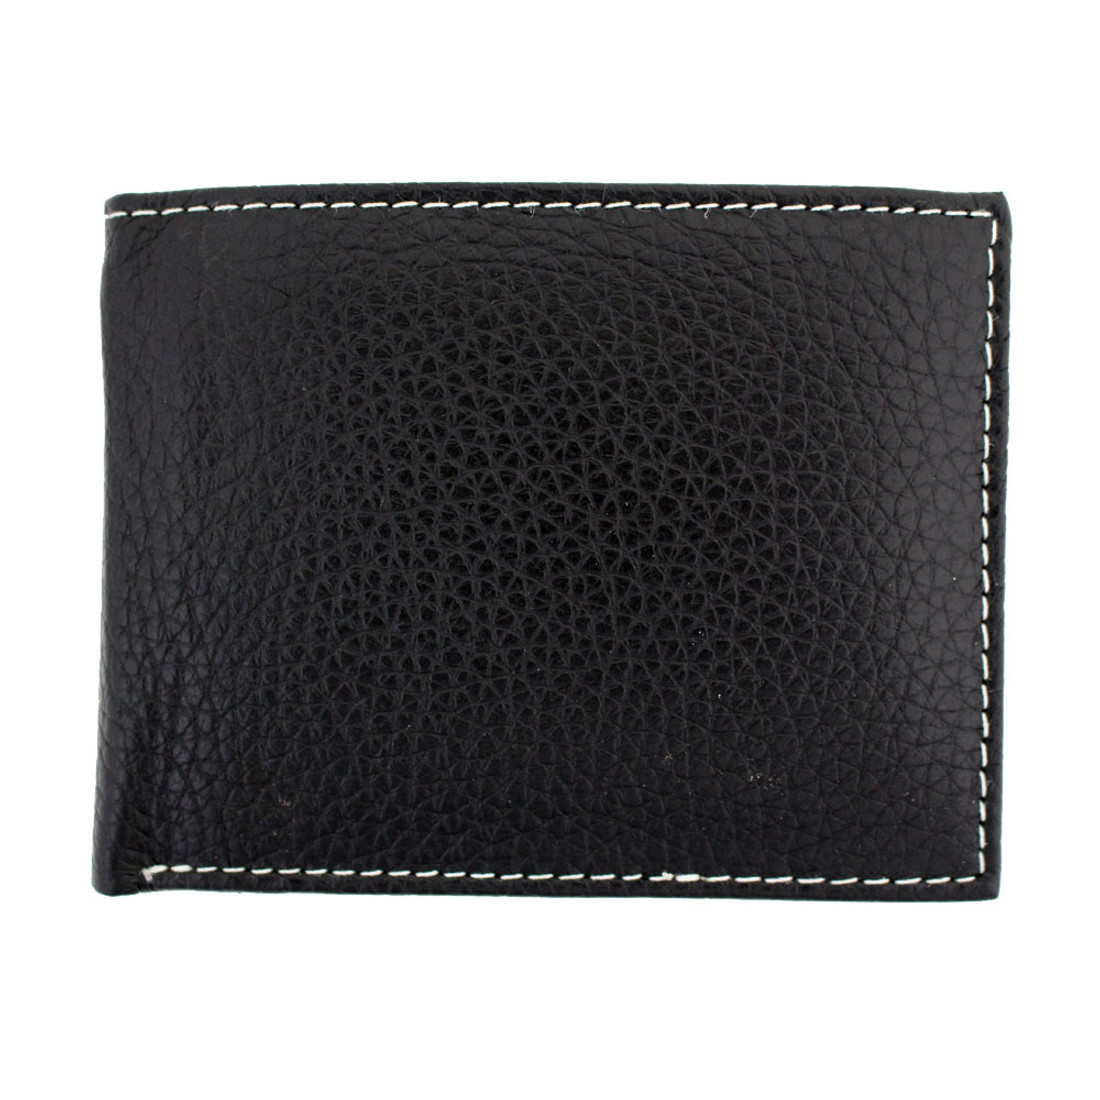 Bifold leather wallet with white stitching.